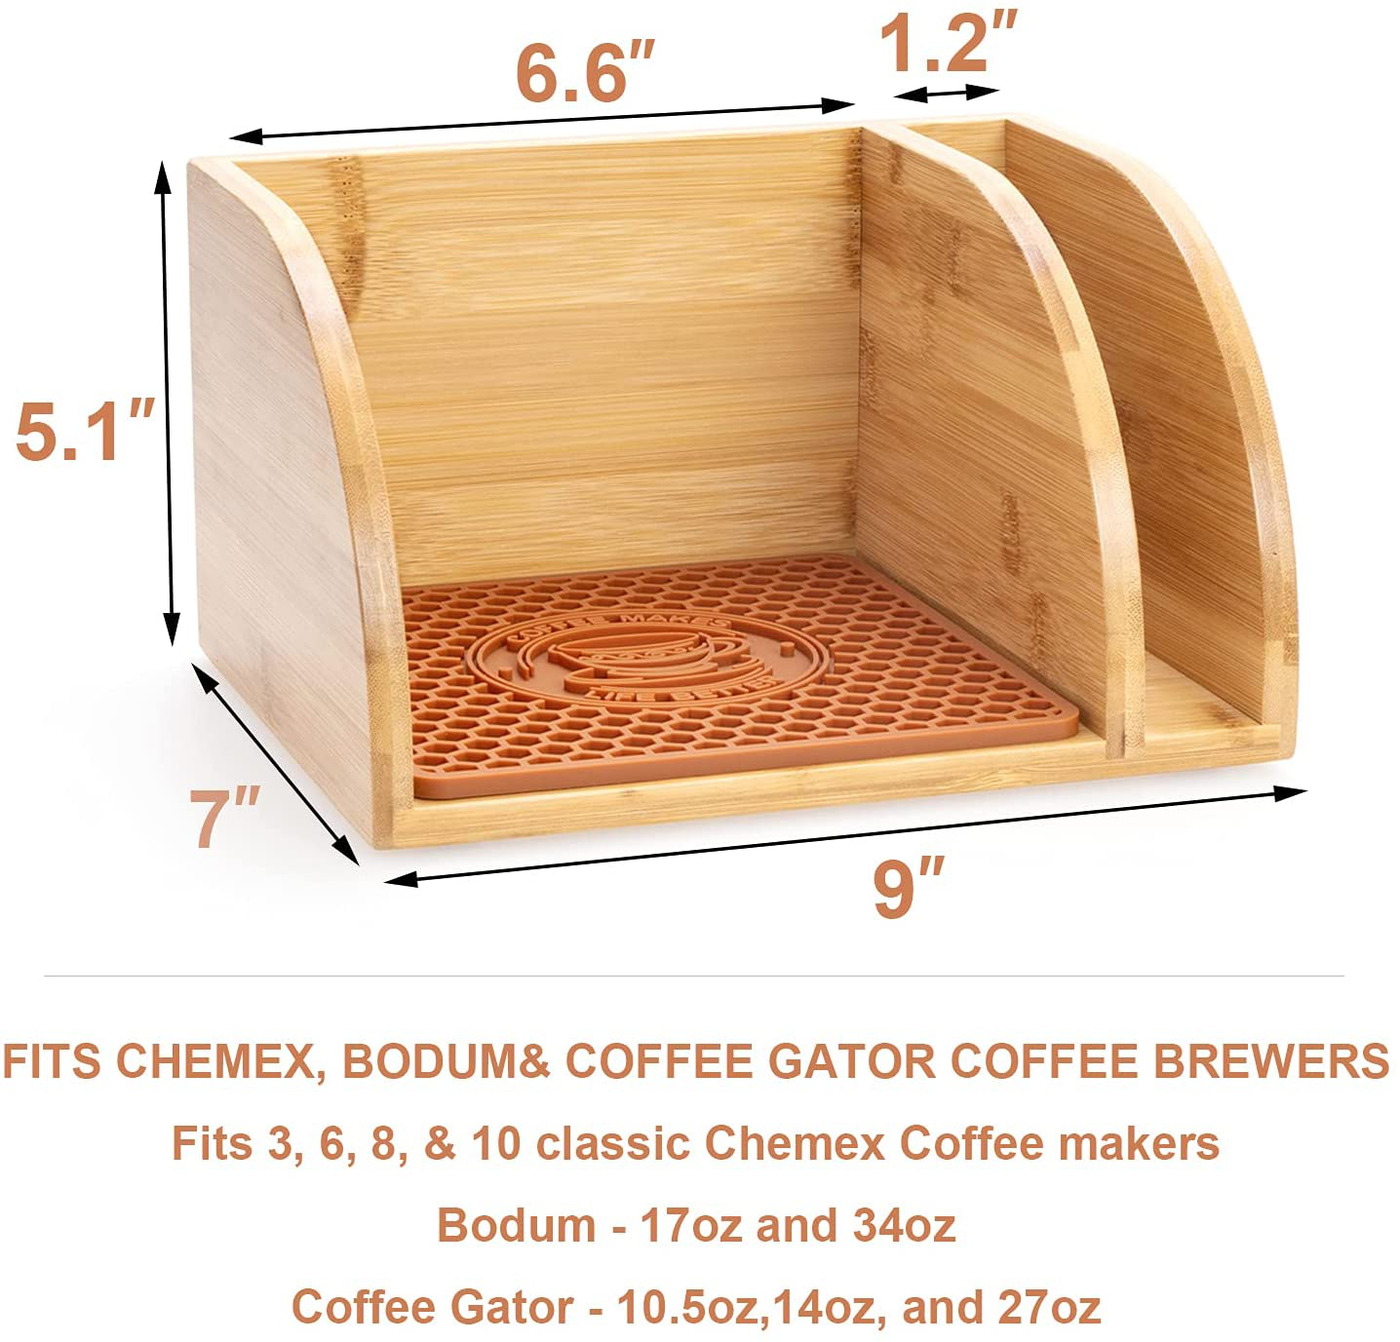 GIRVEM Bamboo Organizer Stand Compatible with Chemex Coffee Makers with Matching Brown Mat, Pour Over Coffee Maker Caddy, Fits Collar and Handle Carafes, Holds Coffee Maker and Filters